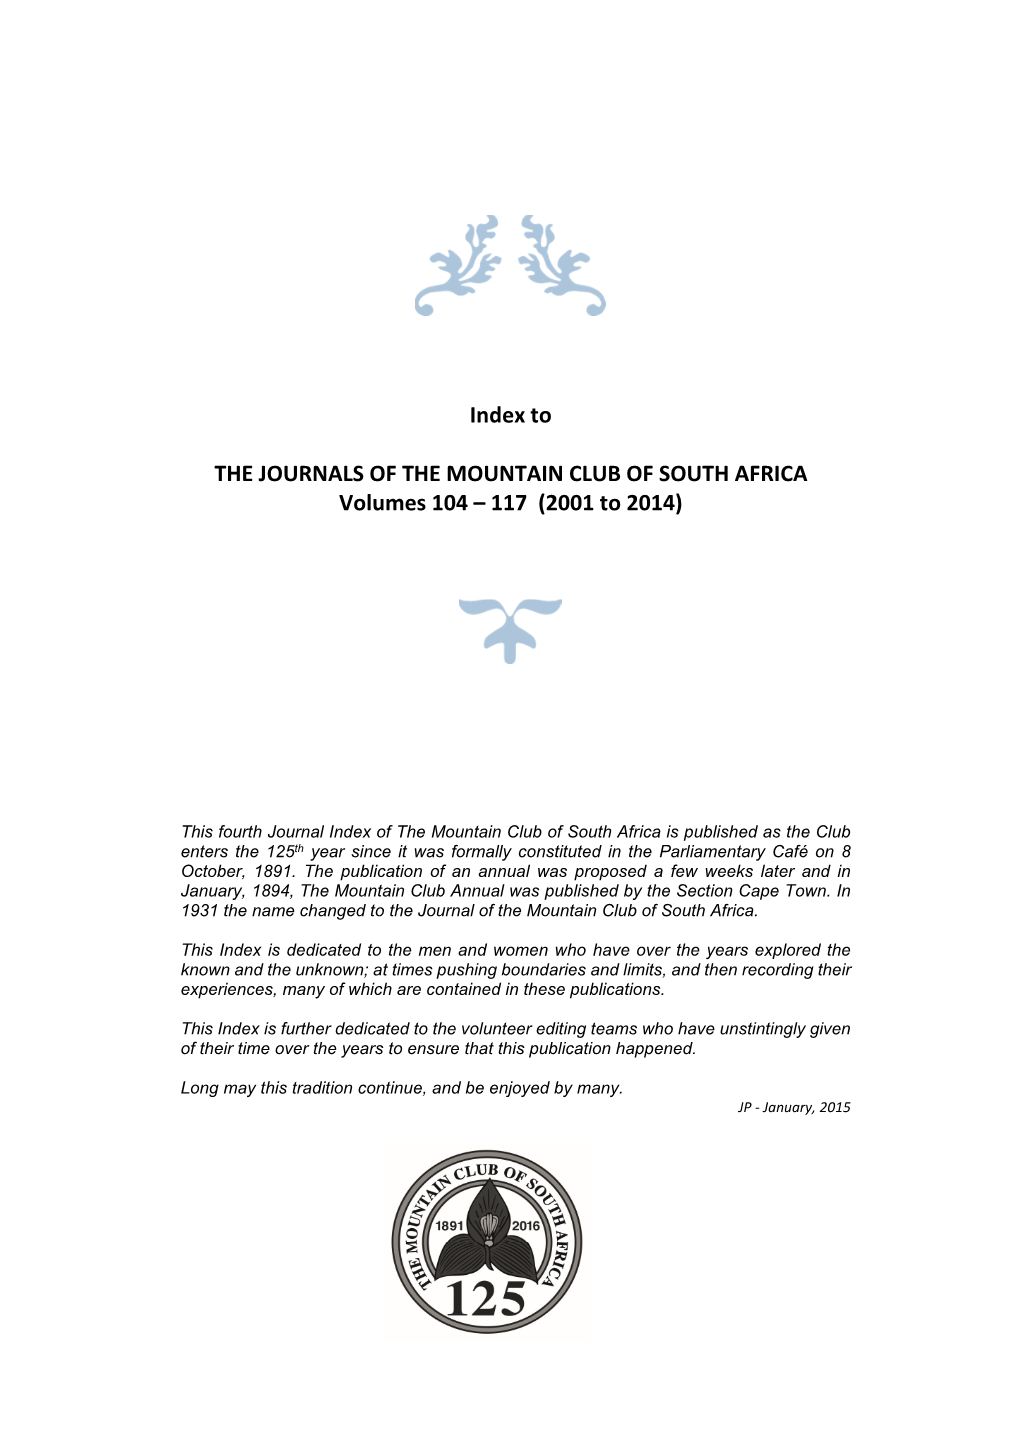 Index to the JOURNALS of the MOUNTAIN CLUB of SOUTH AFRICA Volumes 104 – 2017 (2001 to 2014)